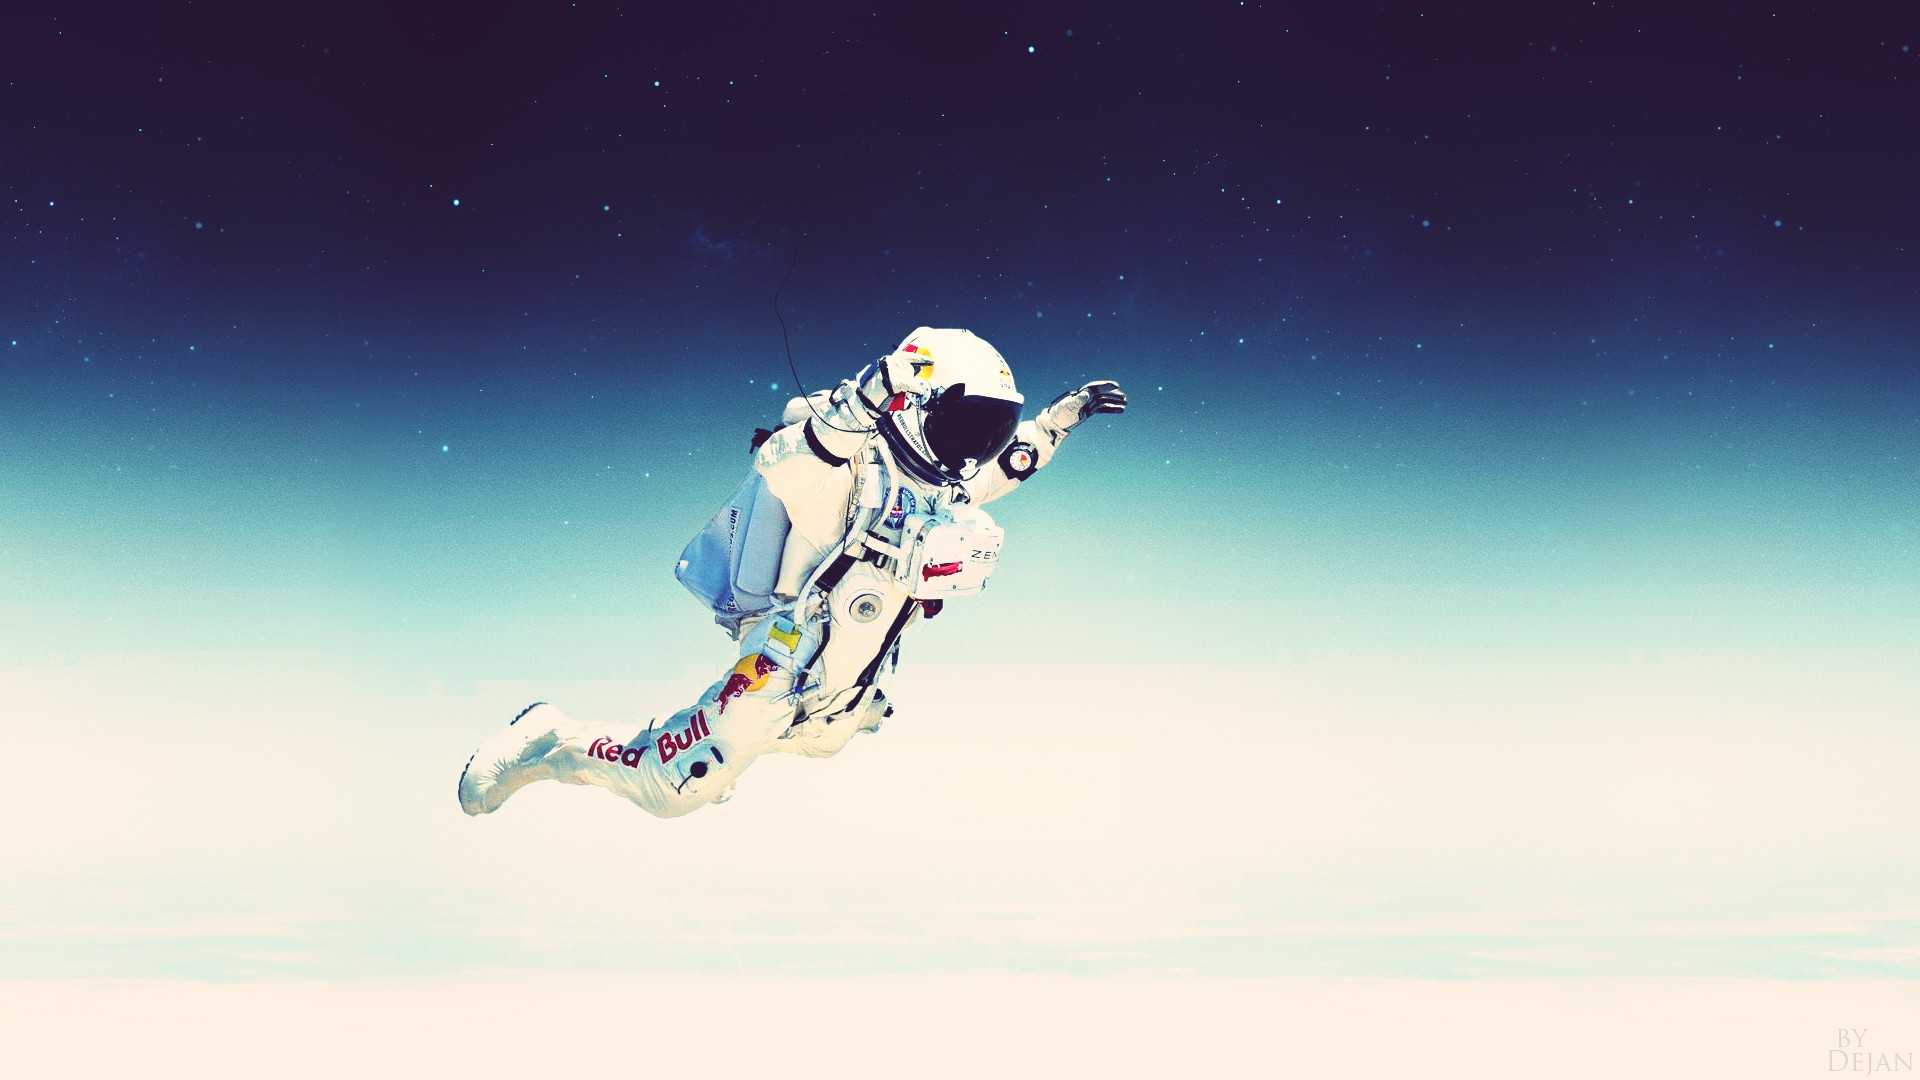 gorgeous wallpapers hd,extreme sport,atmosphere,astronaut,illustration,space